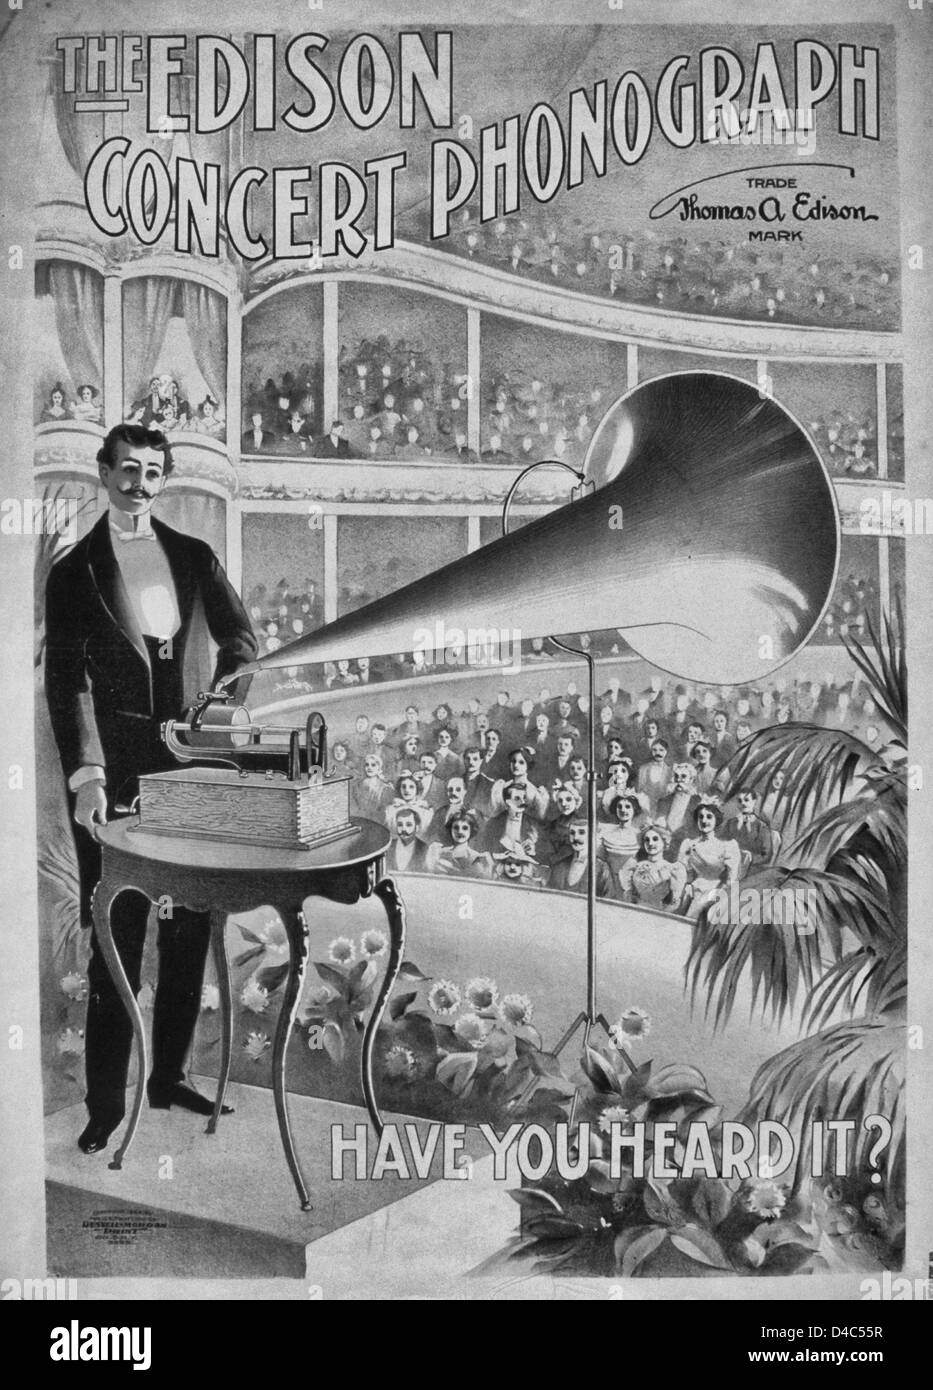 The Edison concert phonograph Have you heard itt? Advertising poster for Edison phonographs showing a man playing a phonograph on a stage before large audience seated in a grand concert hall, circa 1899 Stock Photo